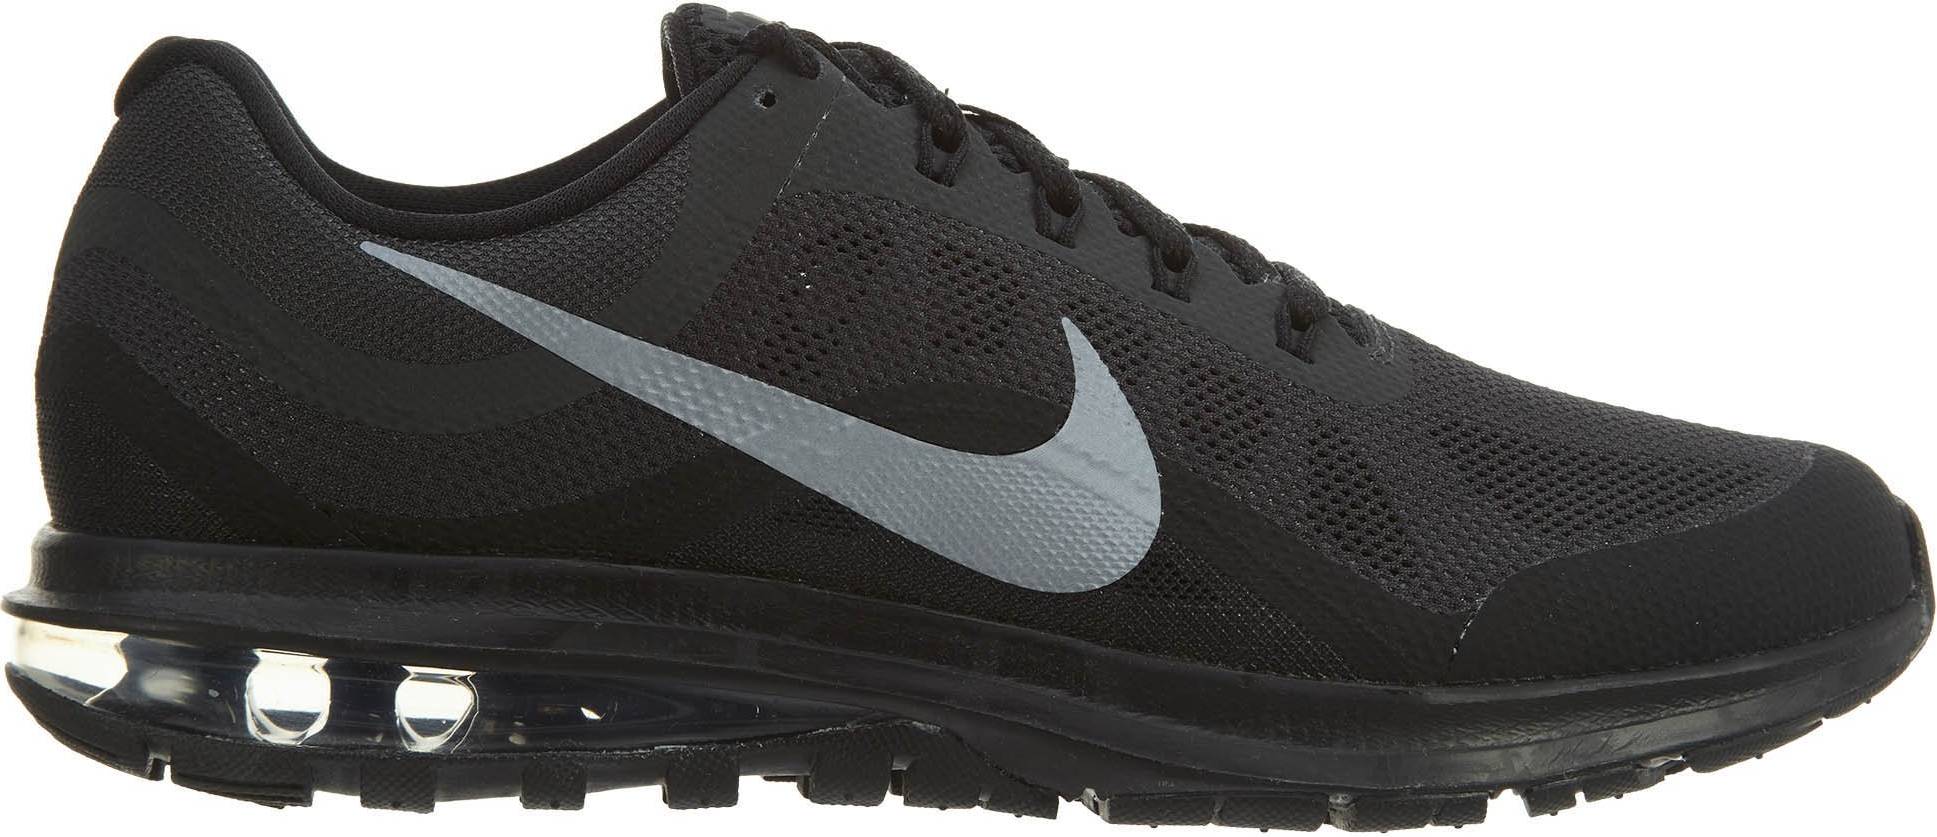 Only $47 + Review of Nike Air Max Dynasty 2 | RunRepeat